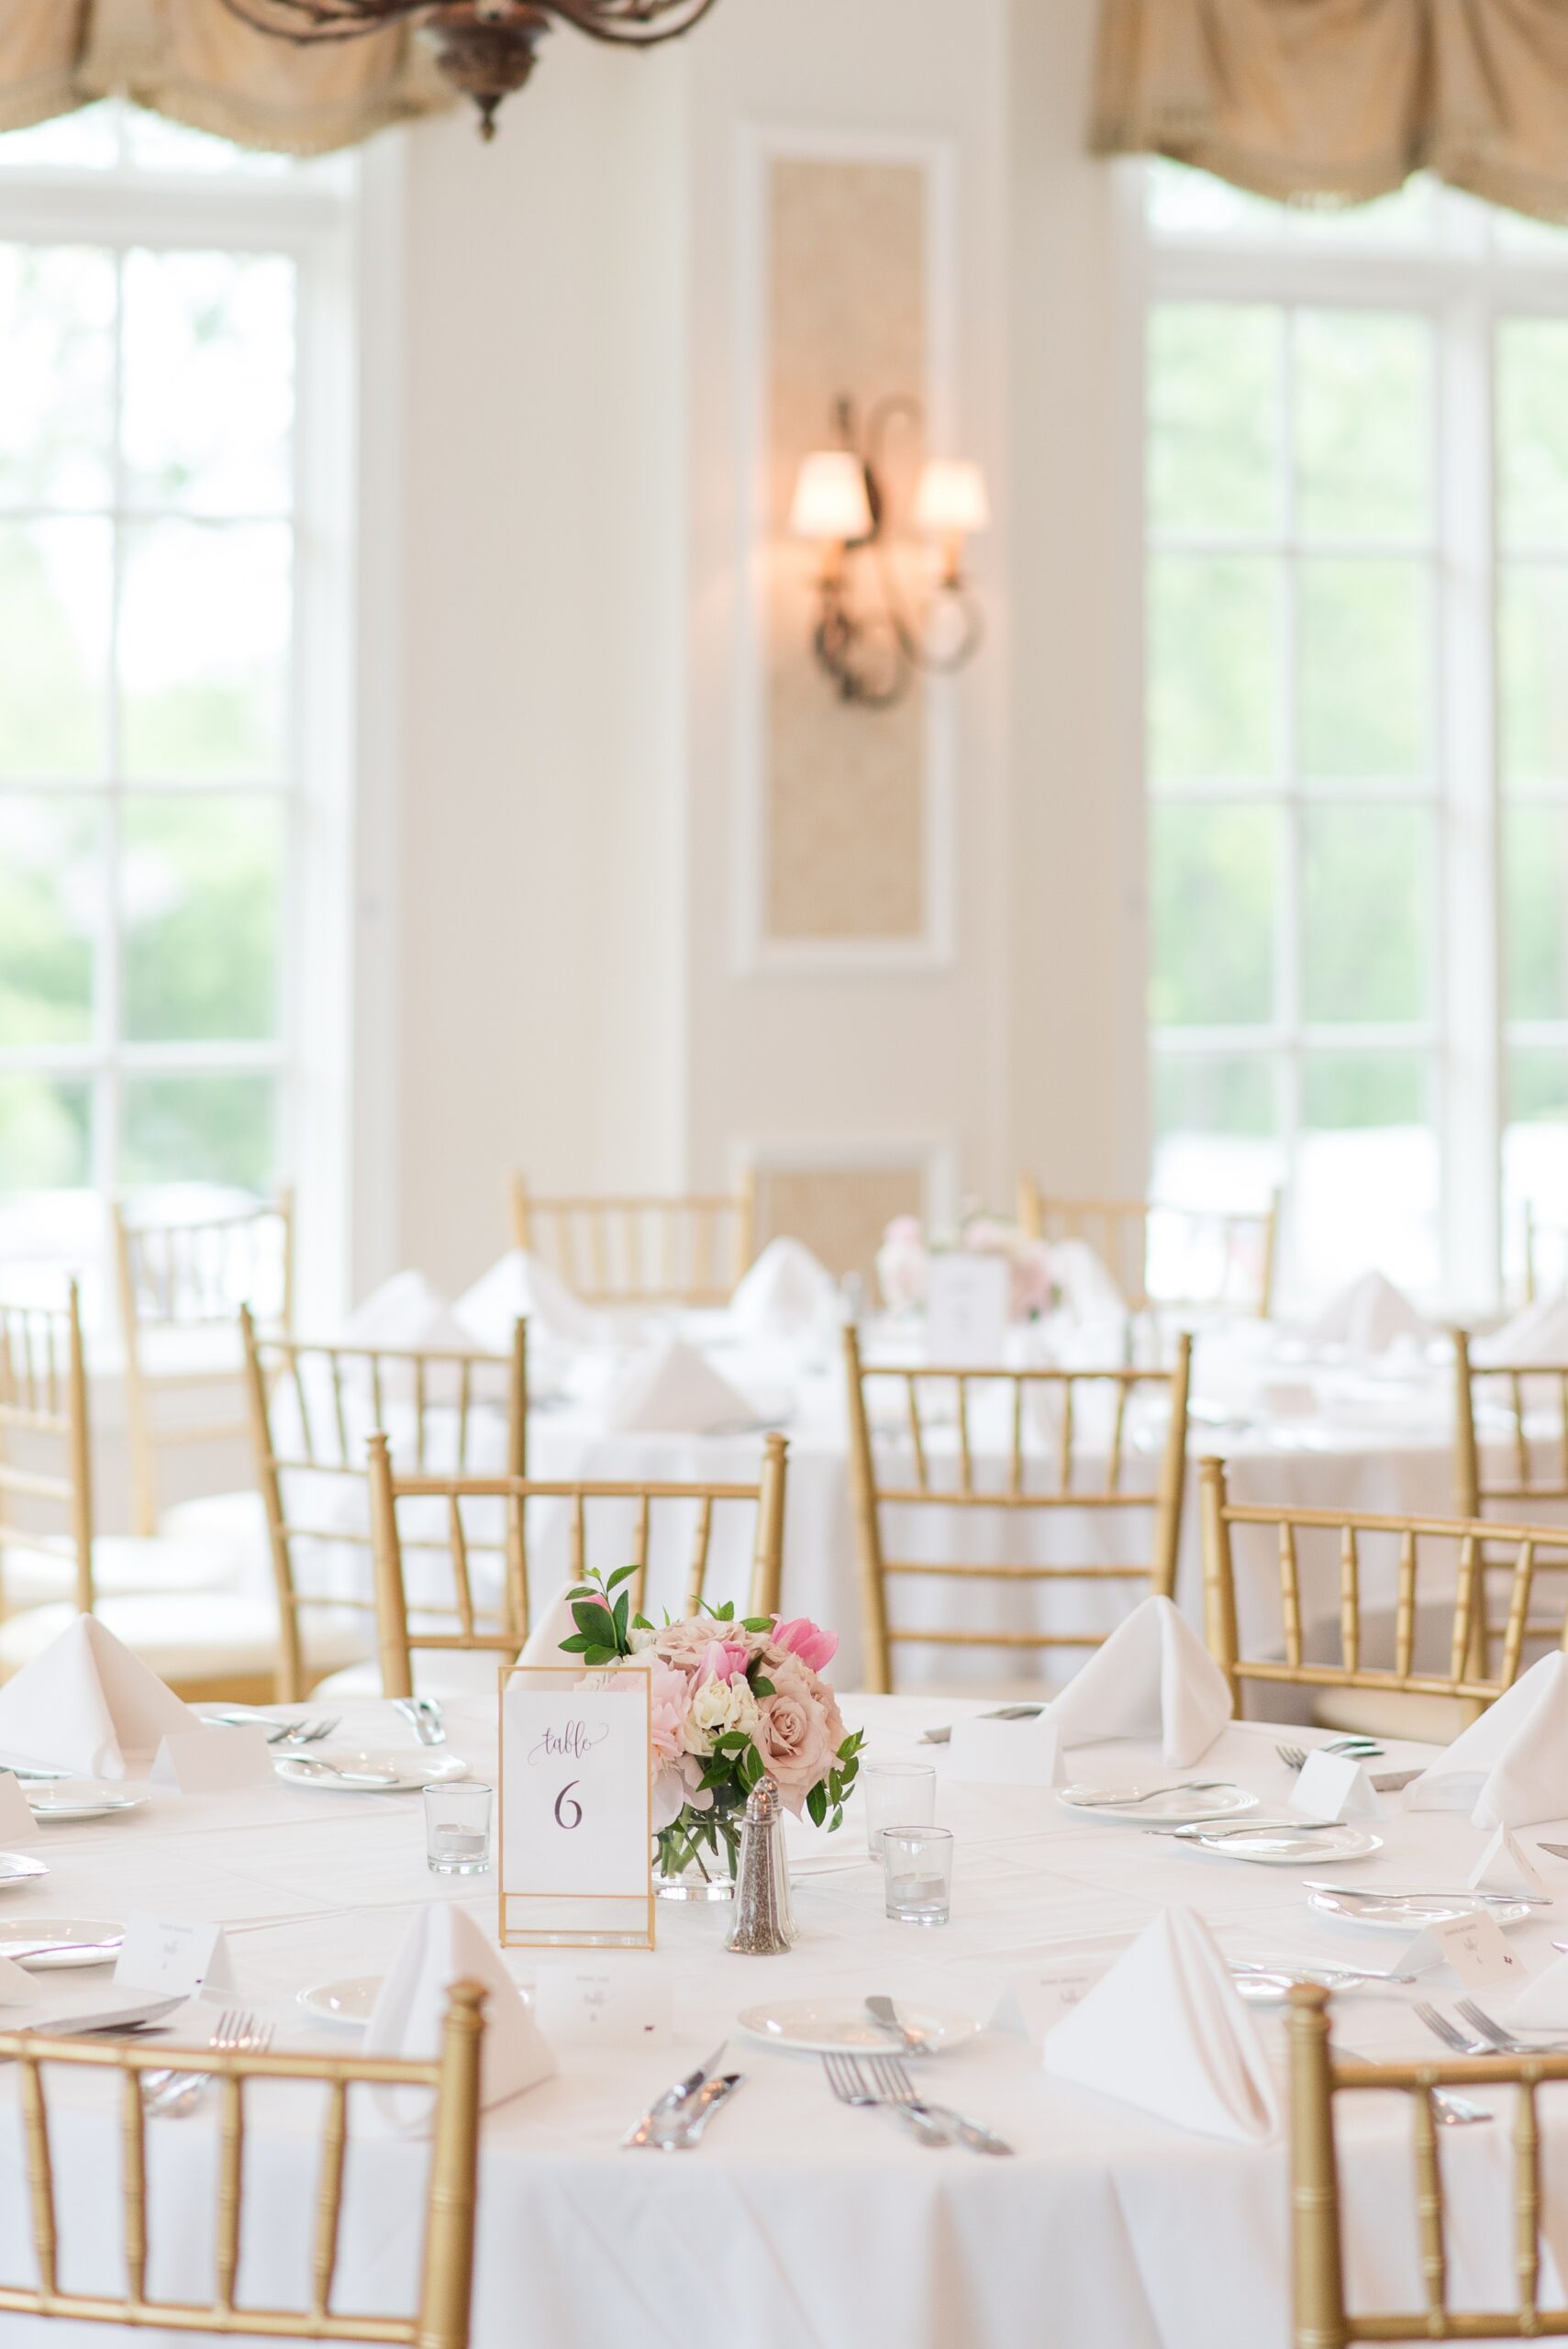 Details of a Manor Country Club Wedding reception with gold chairs, white linens and napkins